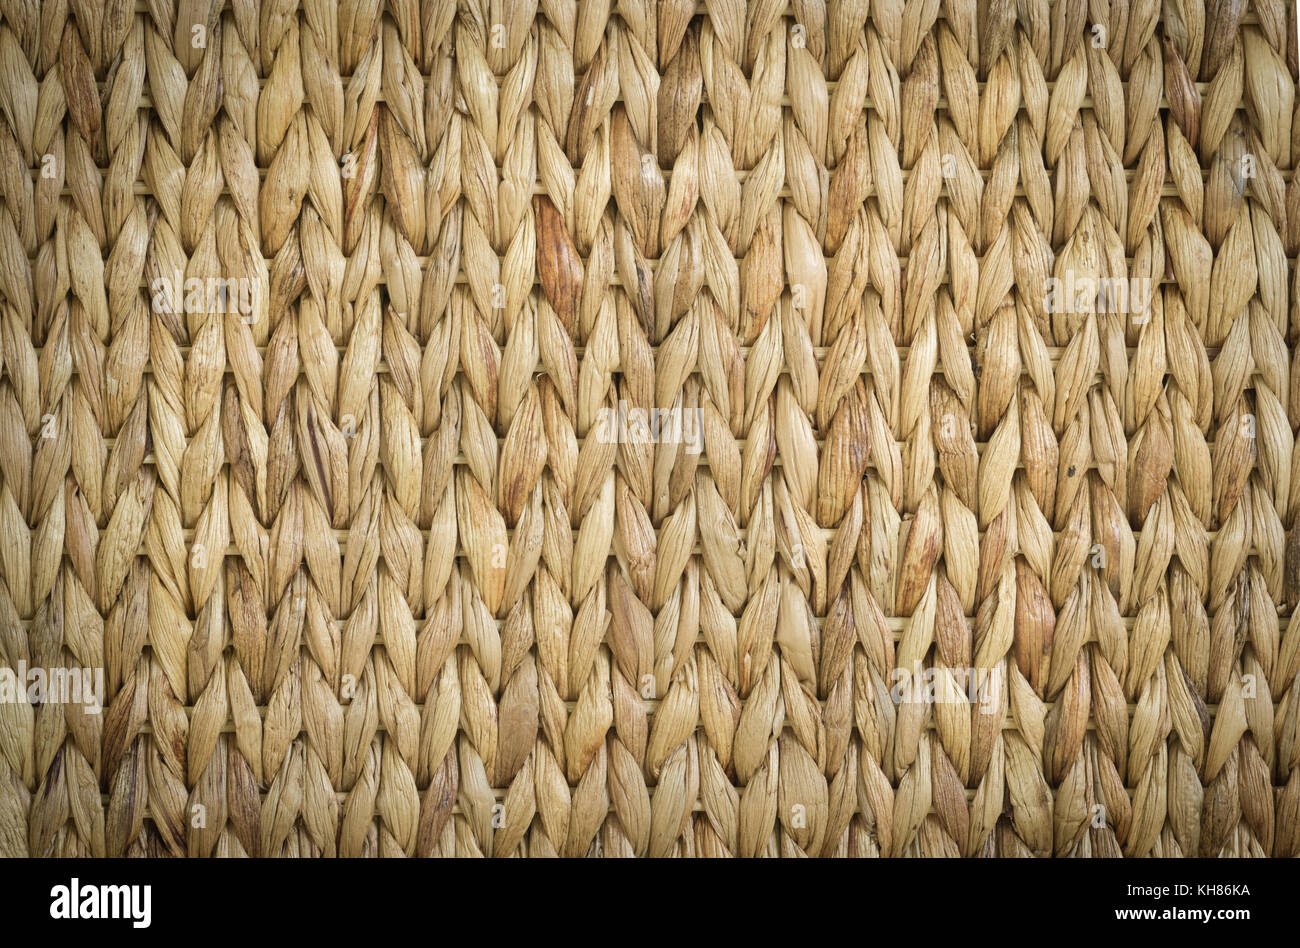 Meshwork of wooden reed wicker texture background Stock Photo